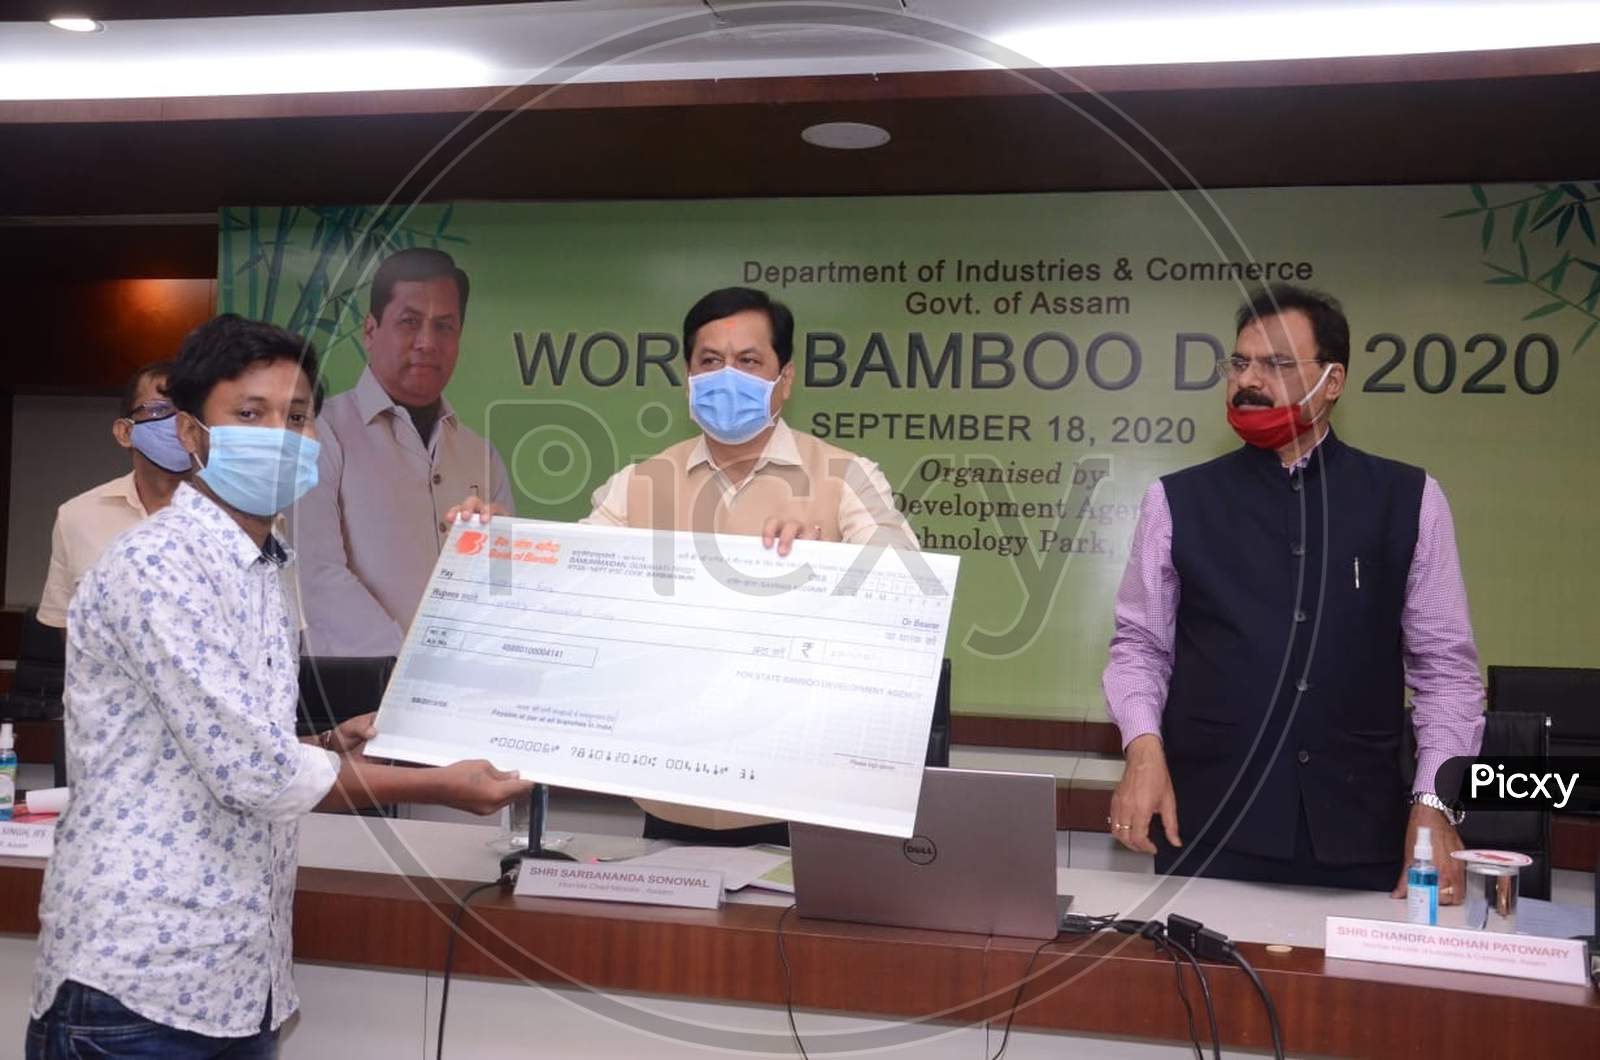 Assam Chief Minister Sarbananda Sonowal presenting a cash reward to Archana Bodo Rongpi, winner of a competition held to mark the World Bamboo Day celebration at Assam Administrative Staff College in Guwahati on September 18, 2020.